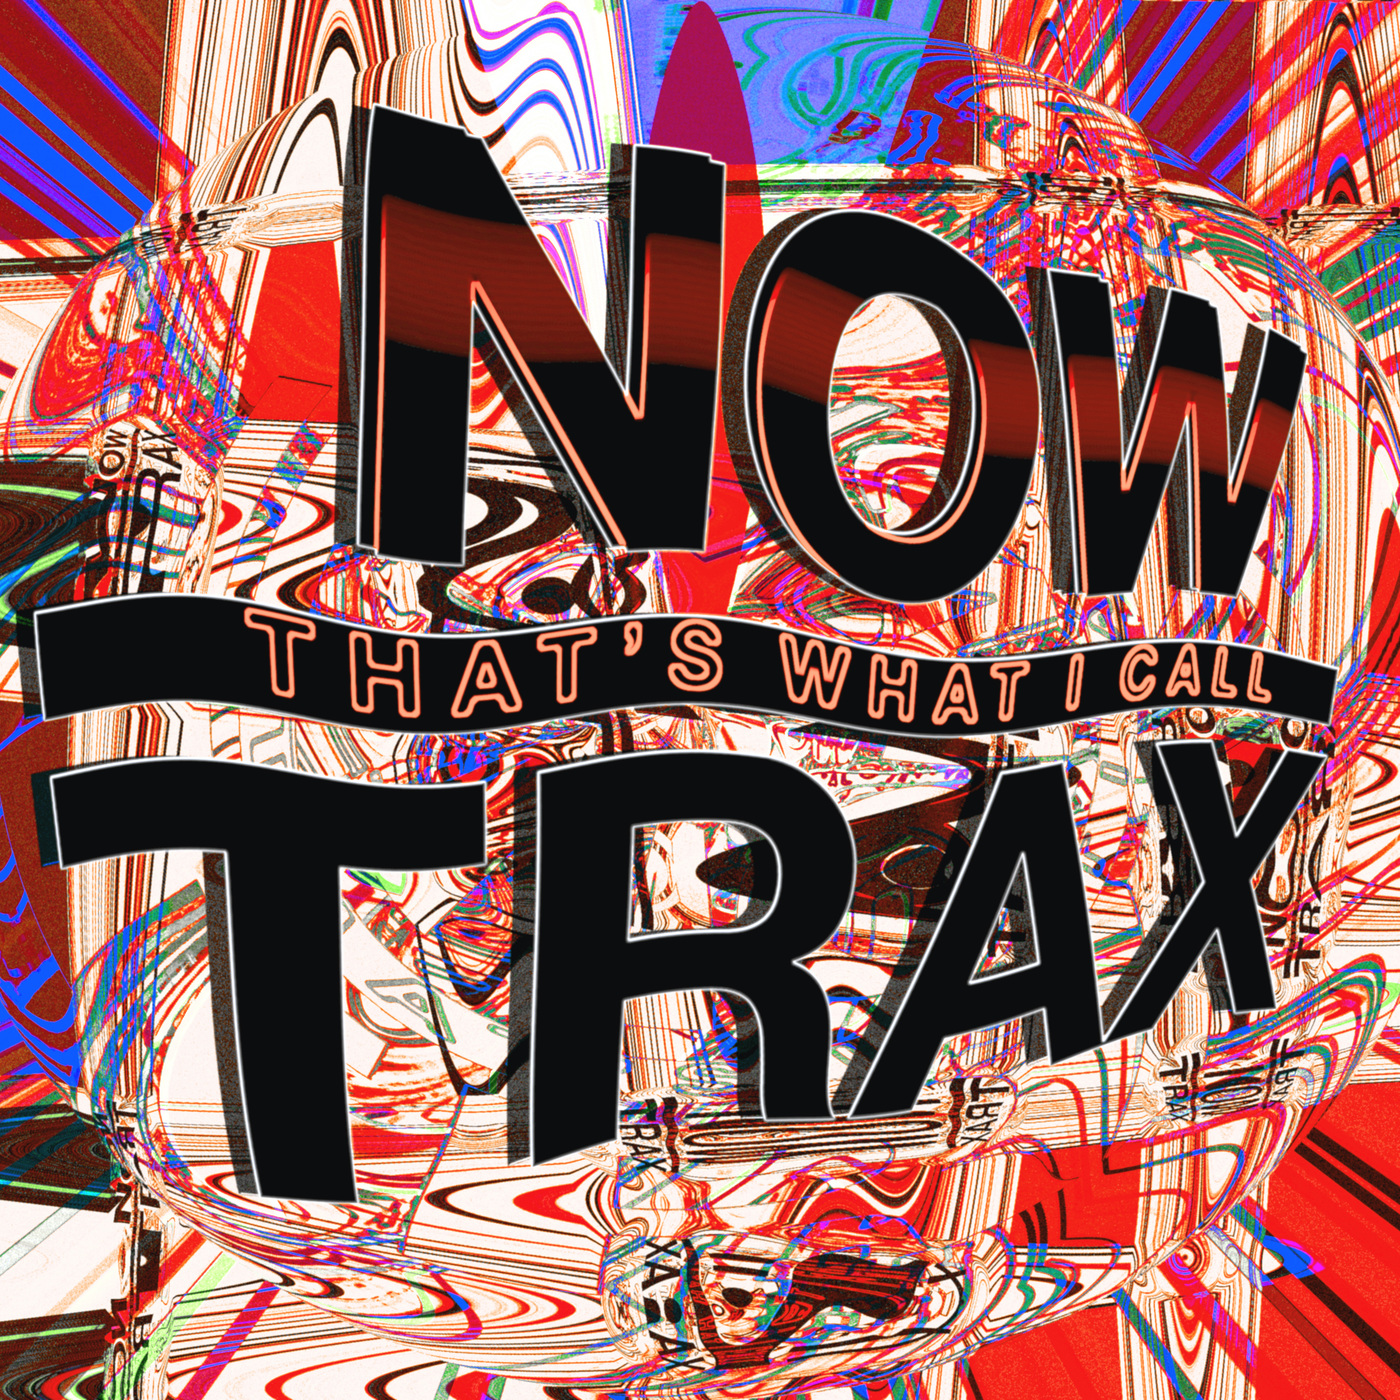 VA - Now That's What I Call Trax! Volume 1 / Chicago Trax